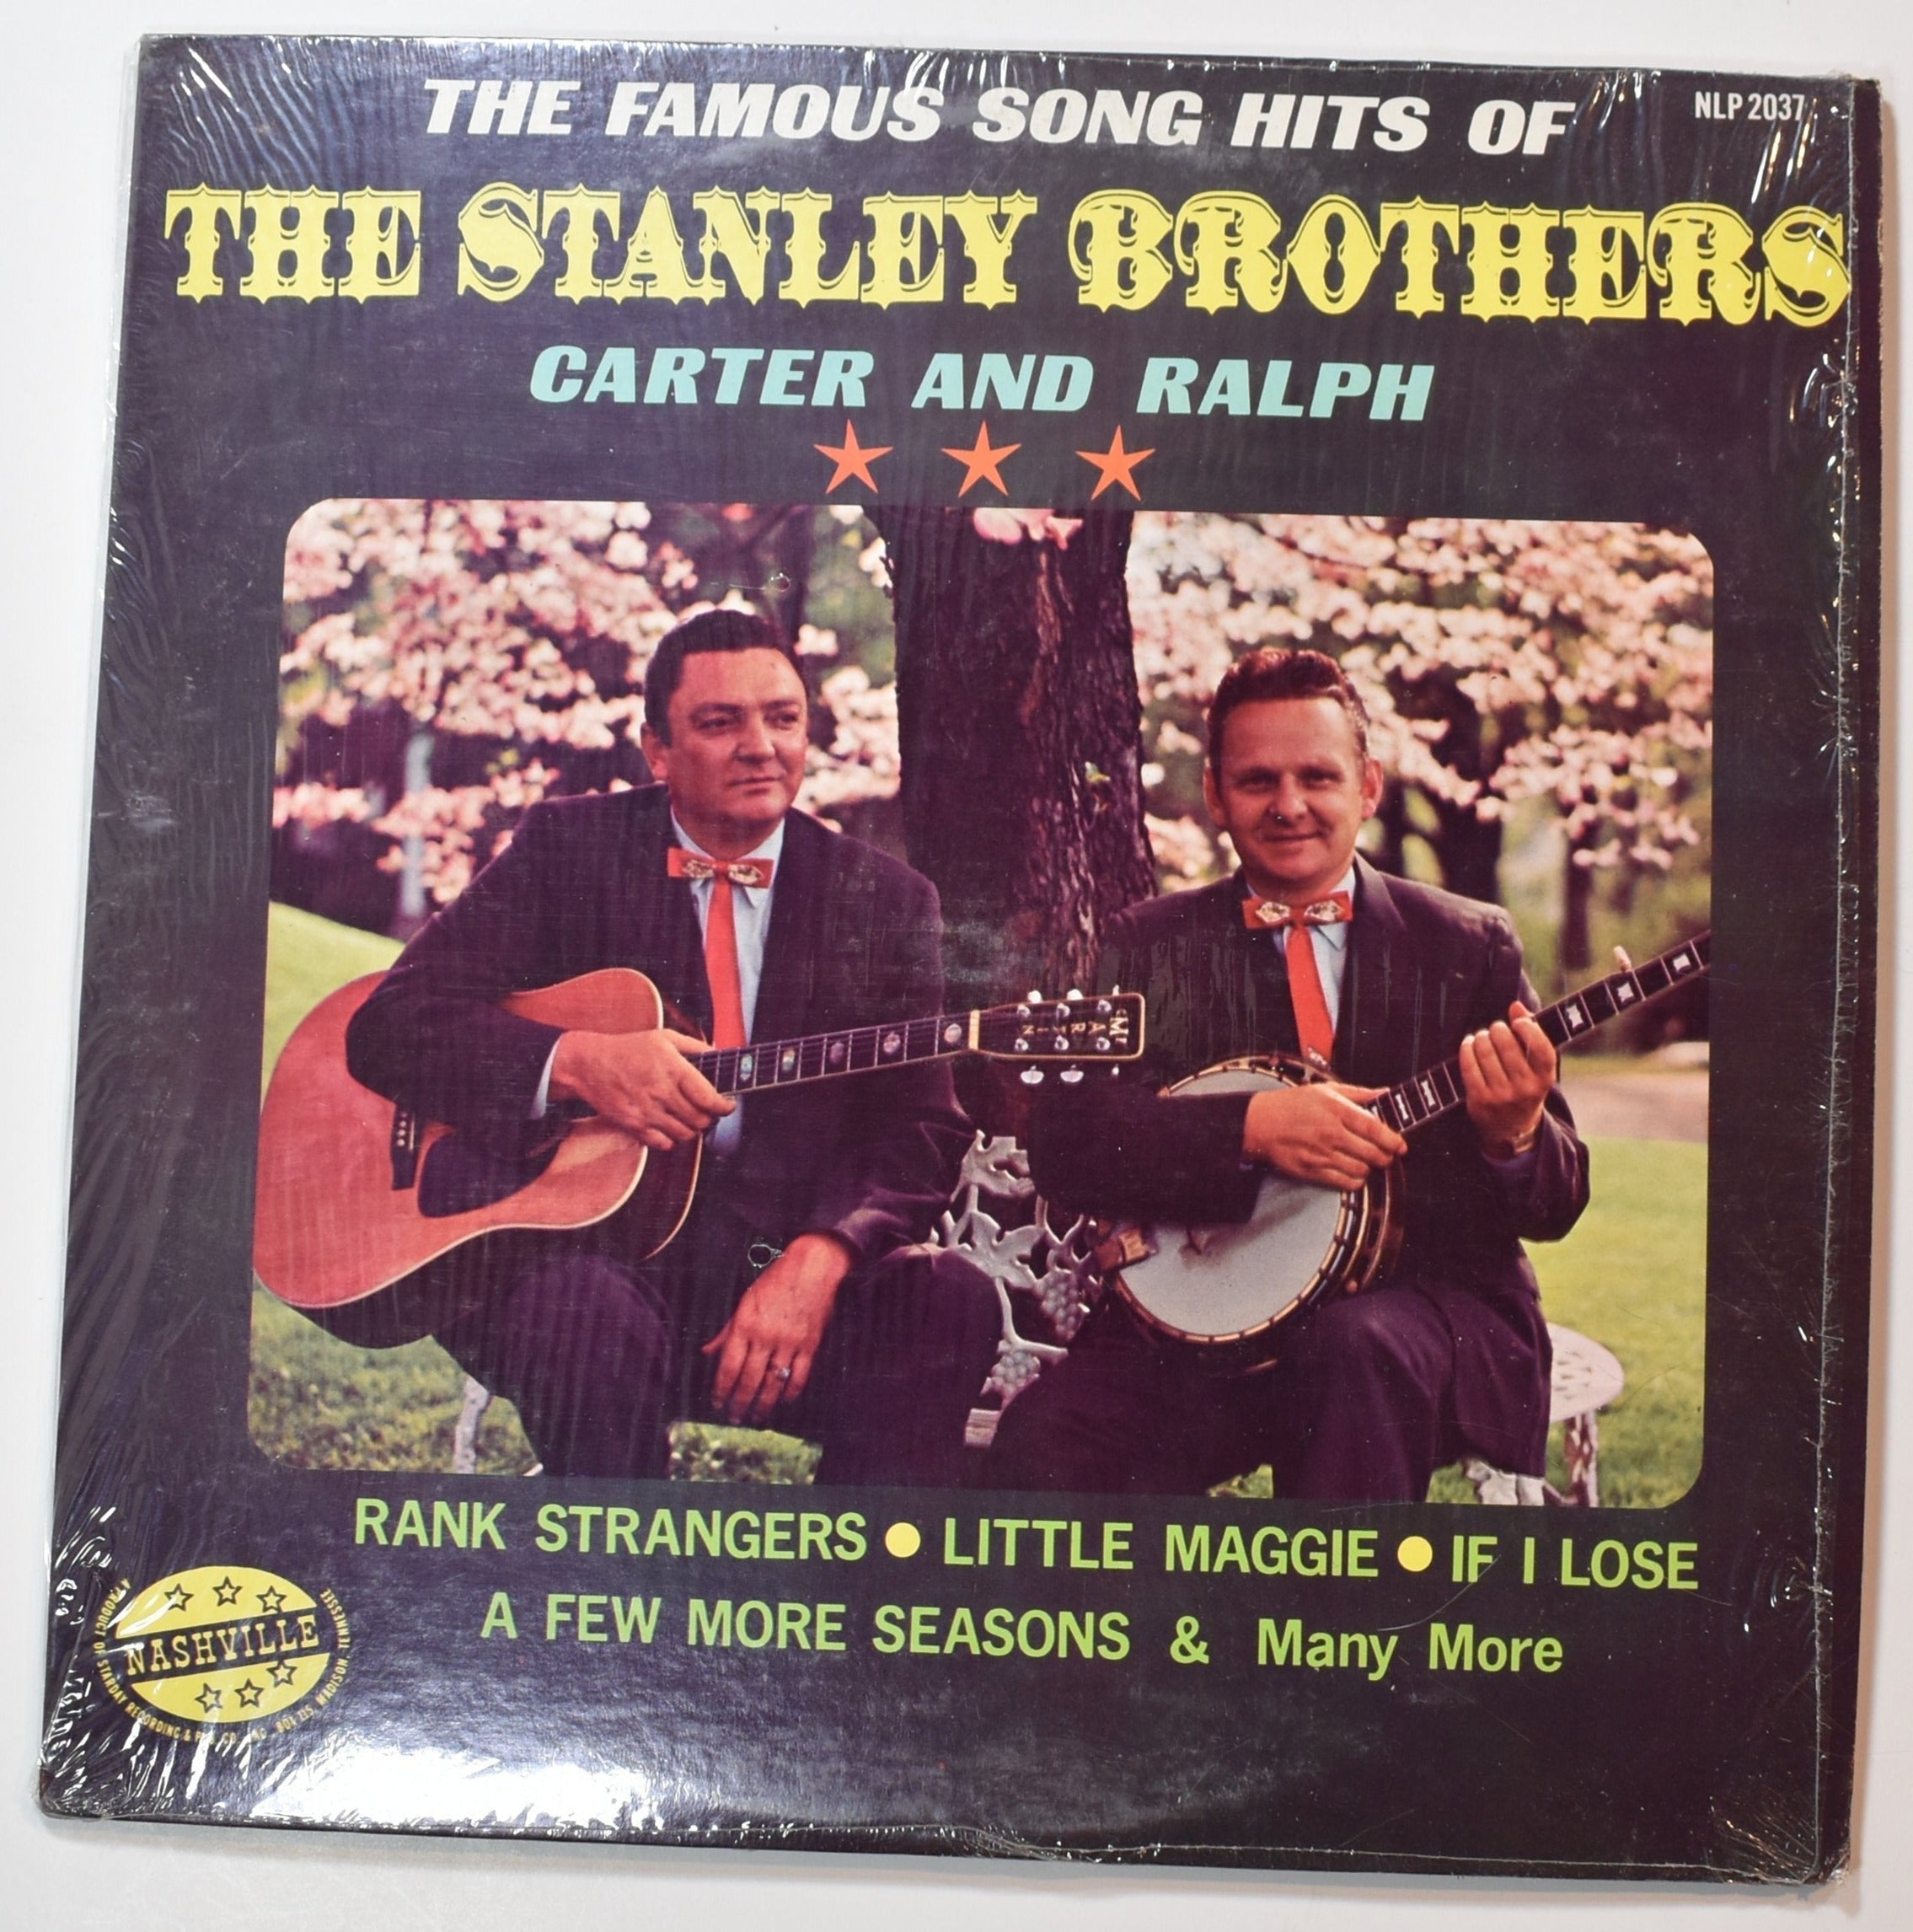 Vinyl Music Record The Stanley Brothers Carter and Ralph record